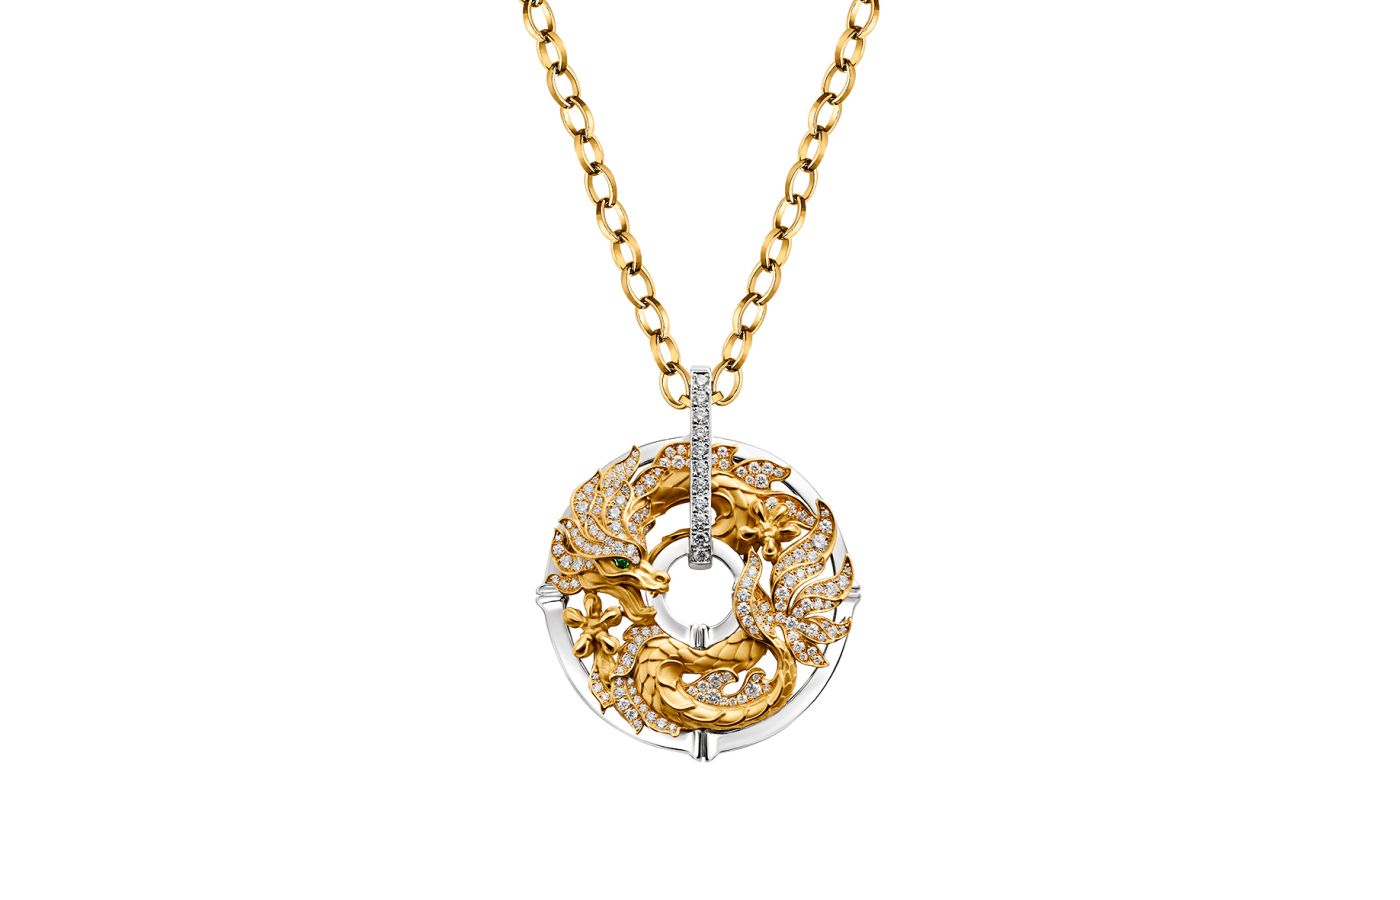 Carrera y Carrera New Shanghai Maxi Pavé pendant necklace with diamonds in 18k yellow and white gold 